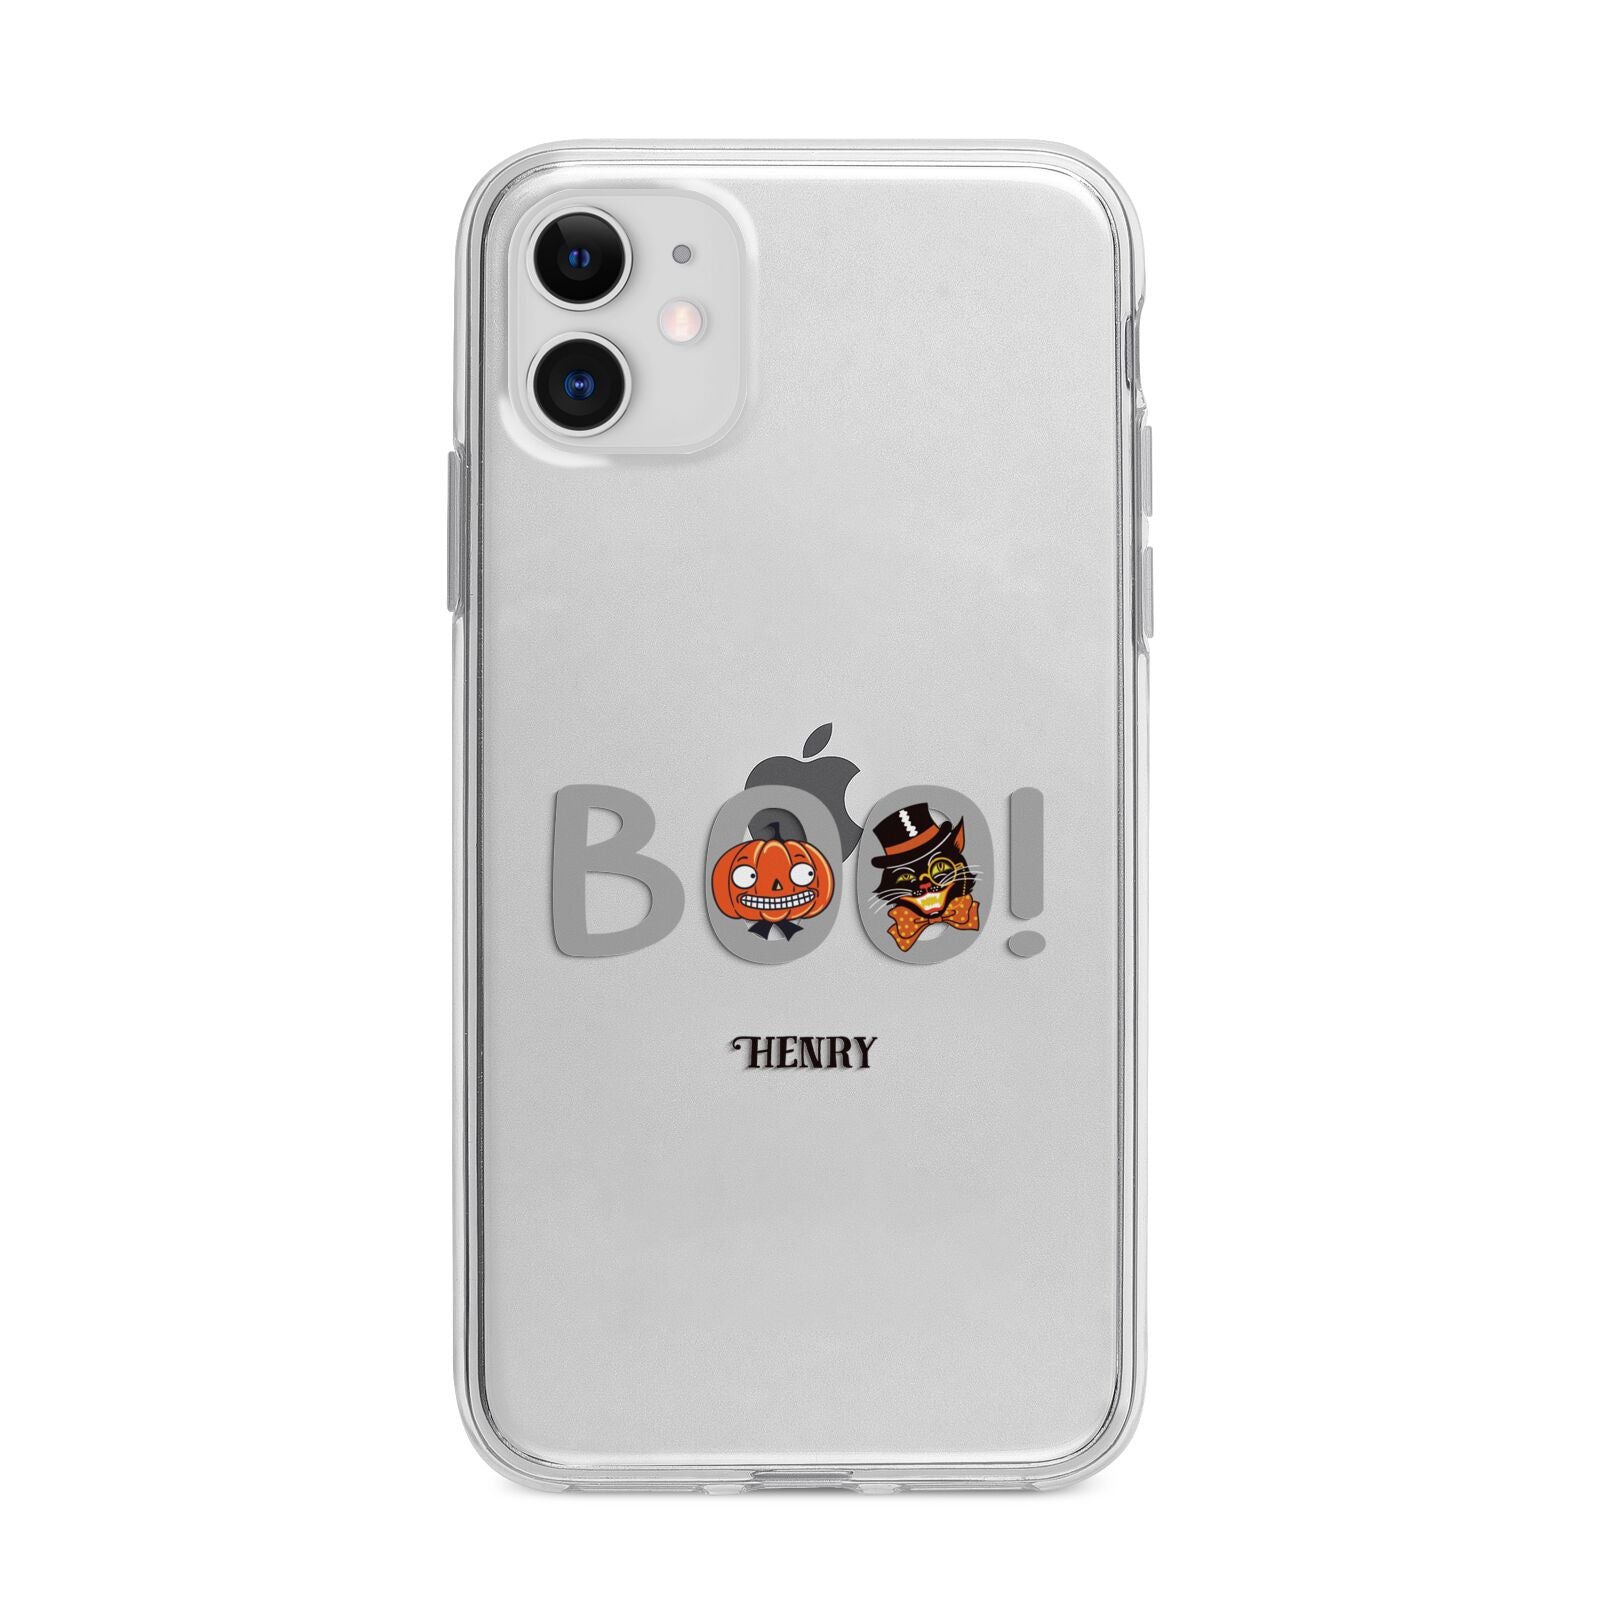 Boo Personalised Apple iPhone 11 in White with Bumper Case